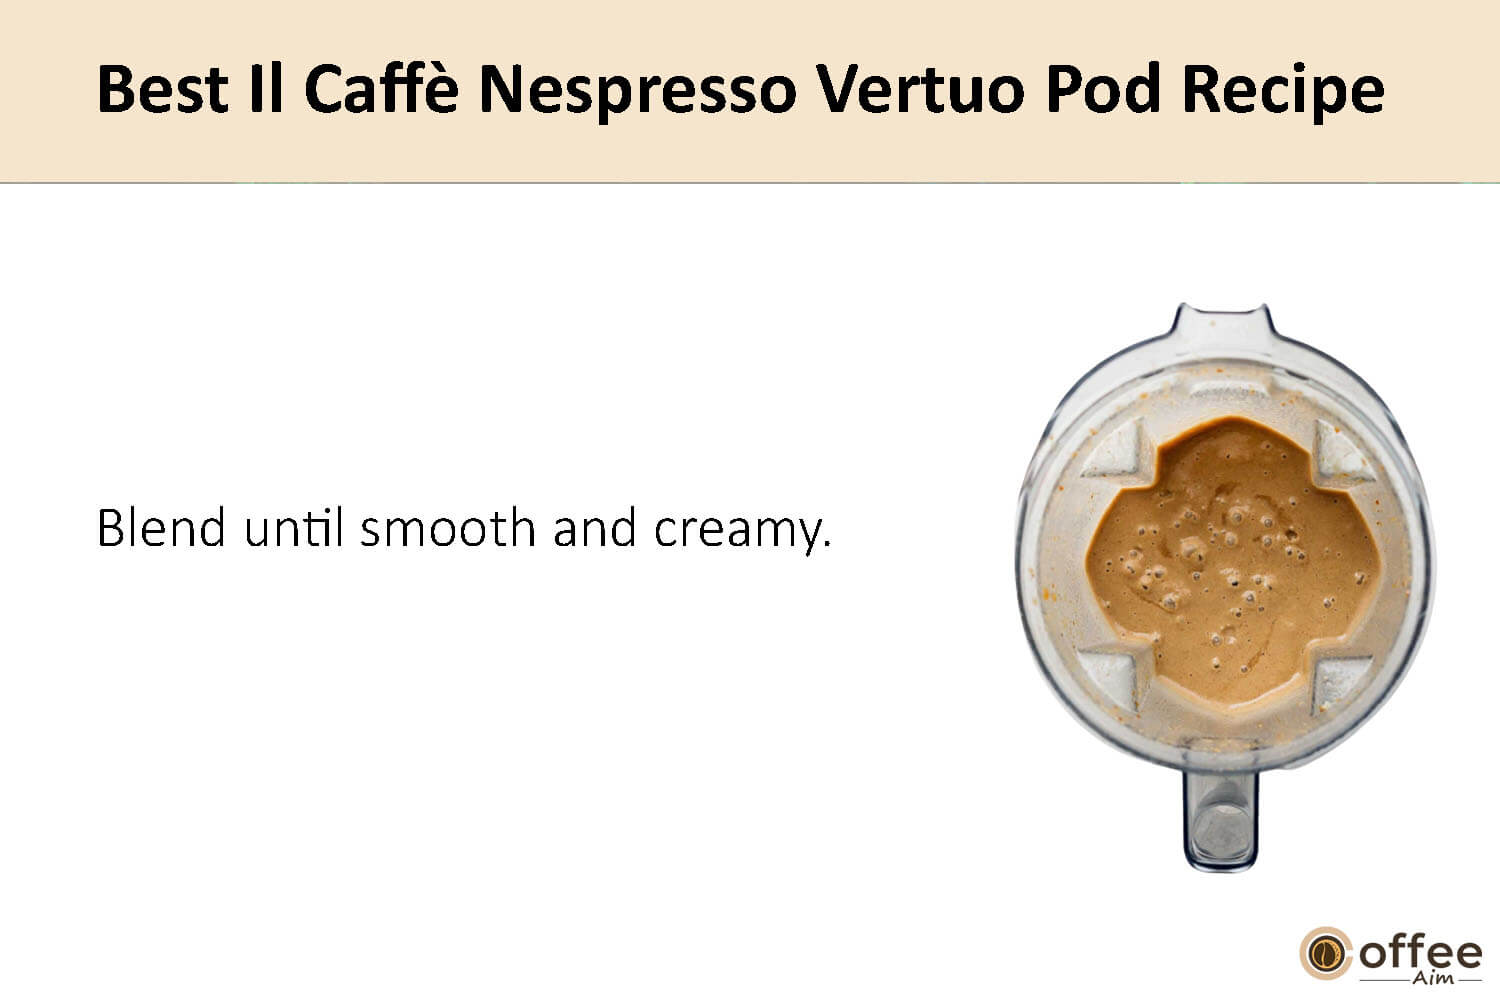 In this image, I clarify the preparation instructions for crafting the finest Nespresso Vertuo coffee pod.